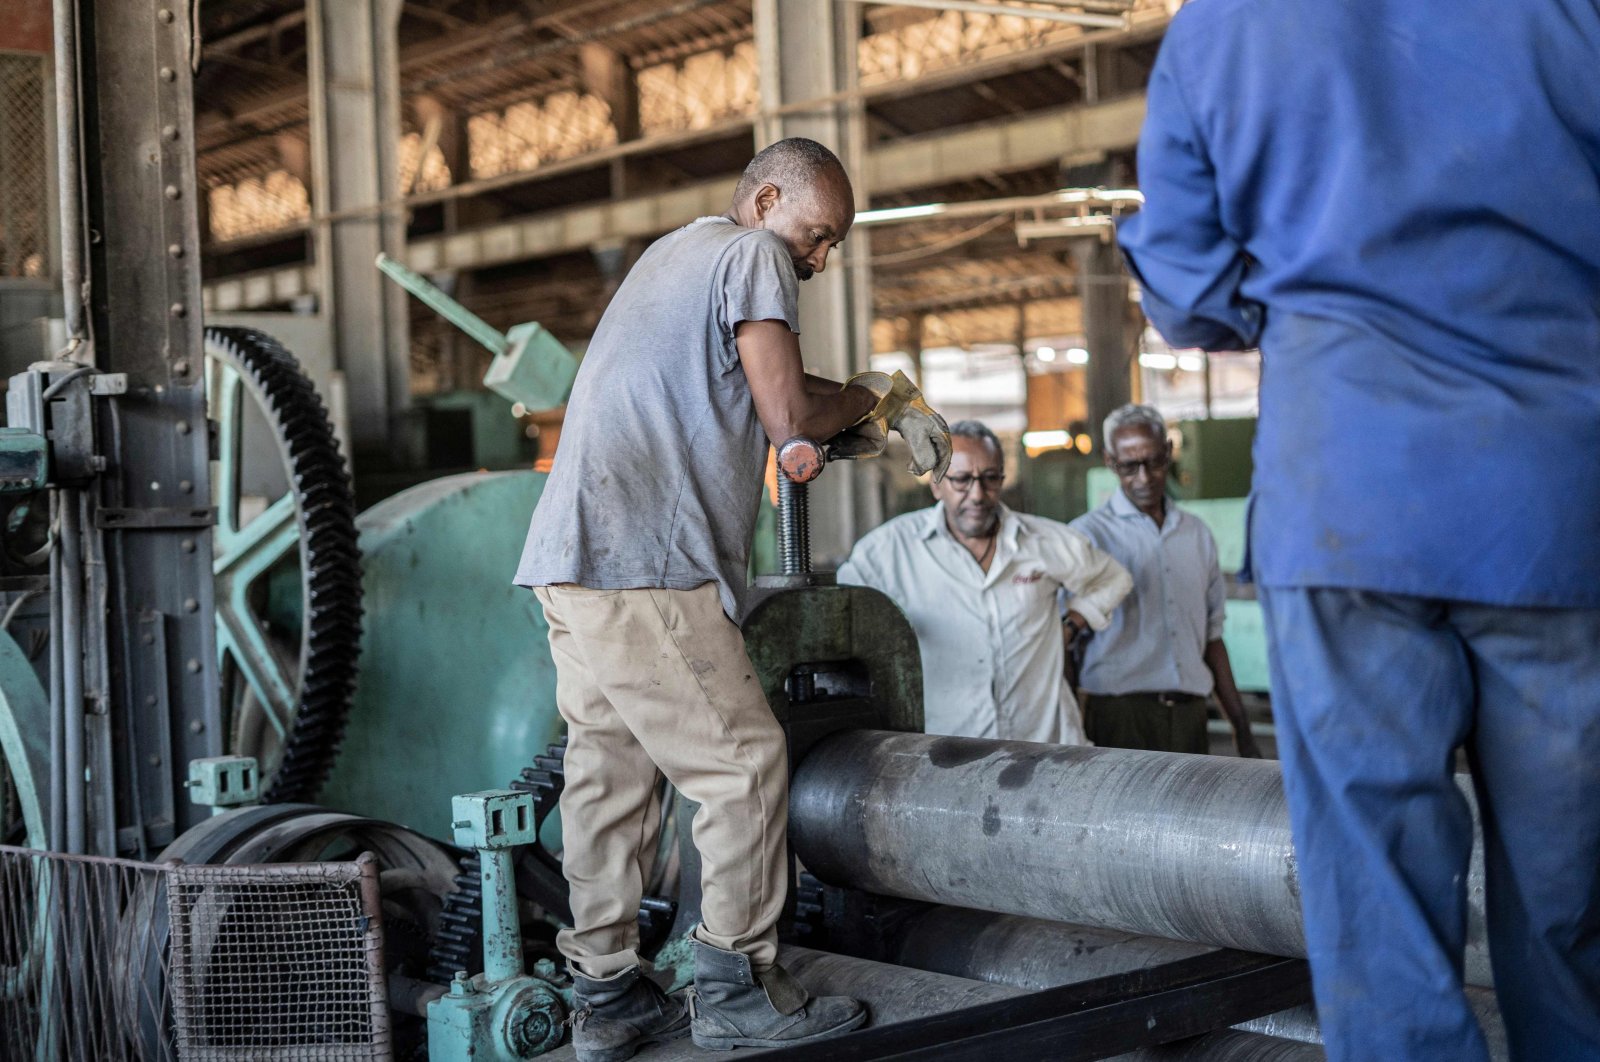 Employees work in the workshop at the old Franco-Ethiopian train station in Dire Dawa, Ethiopia, Oct. 24, 2022. (AFP Photo)